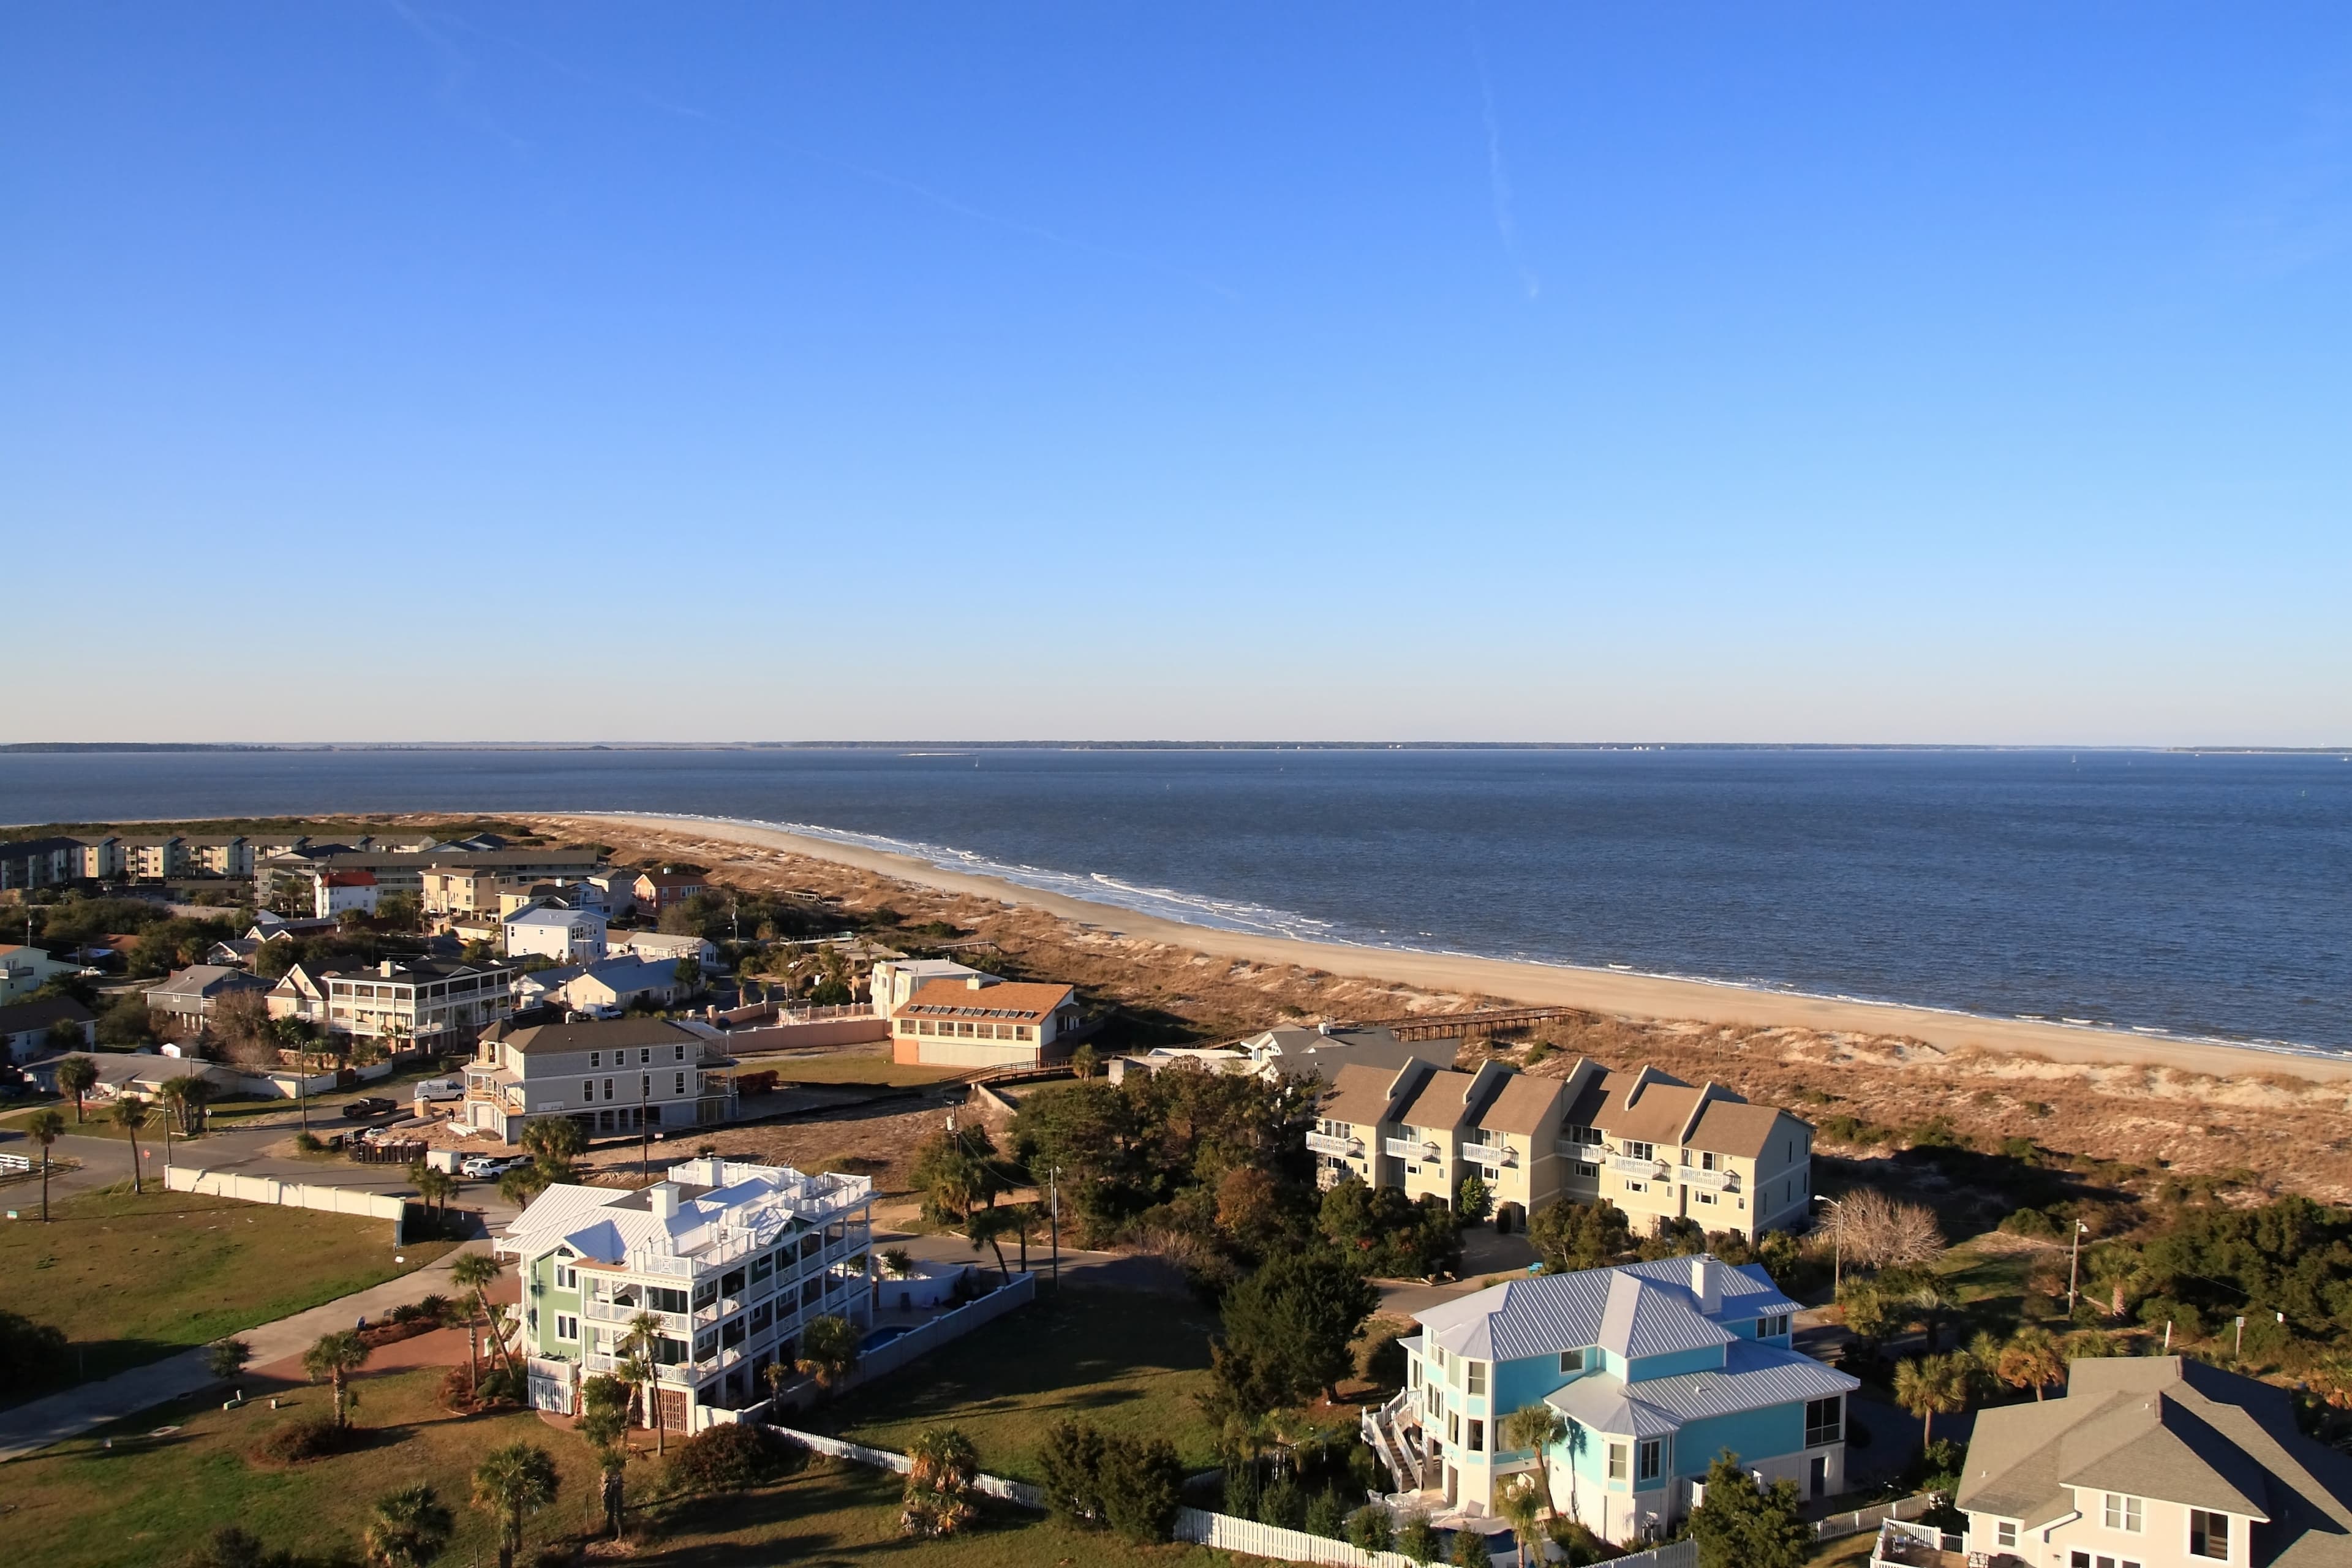 Tybee Island from top of light house